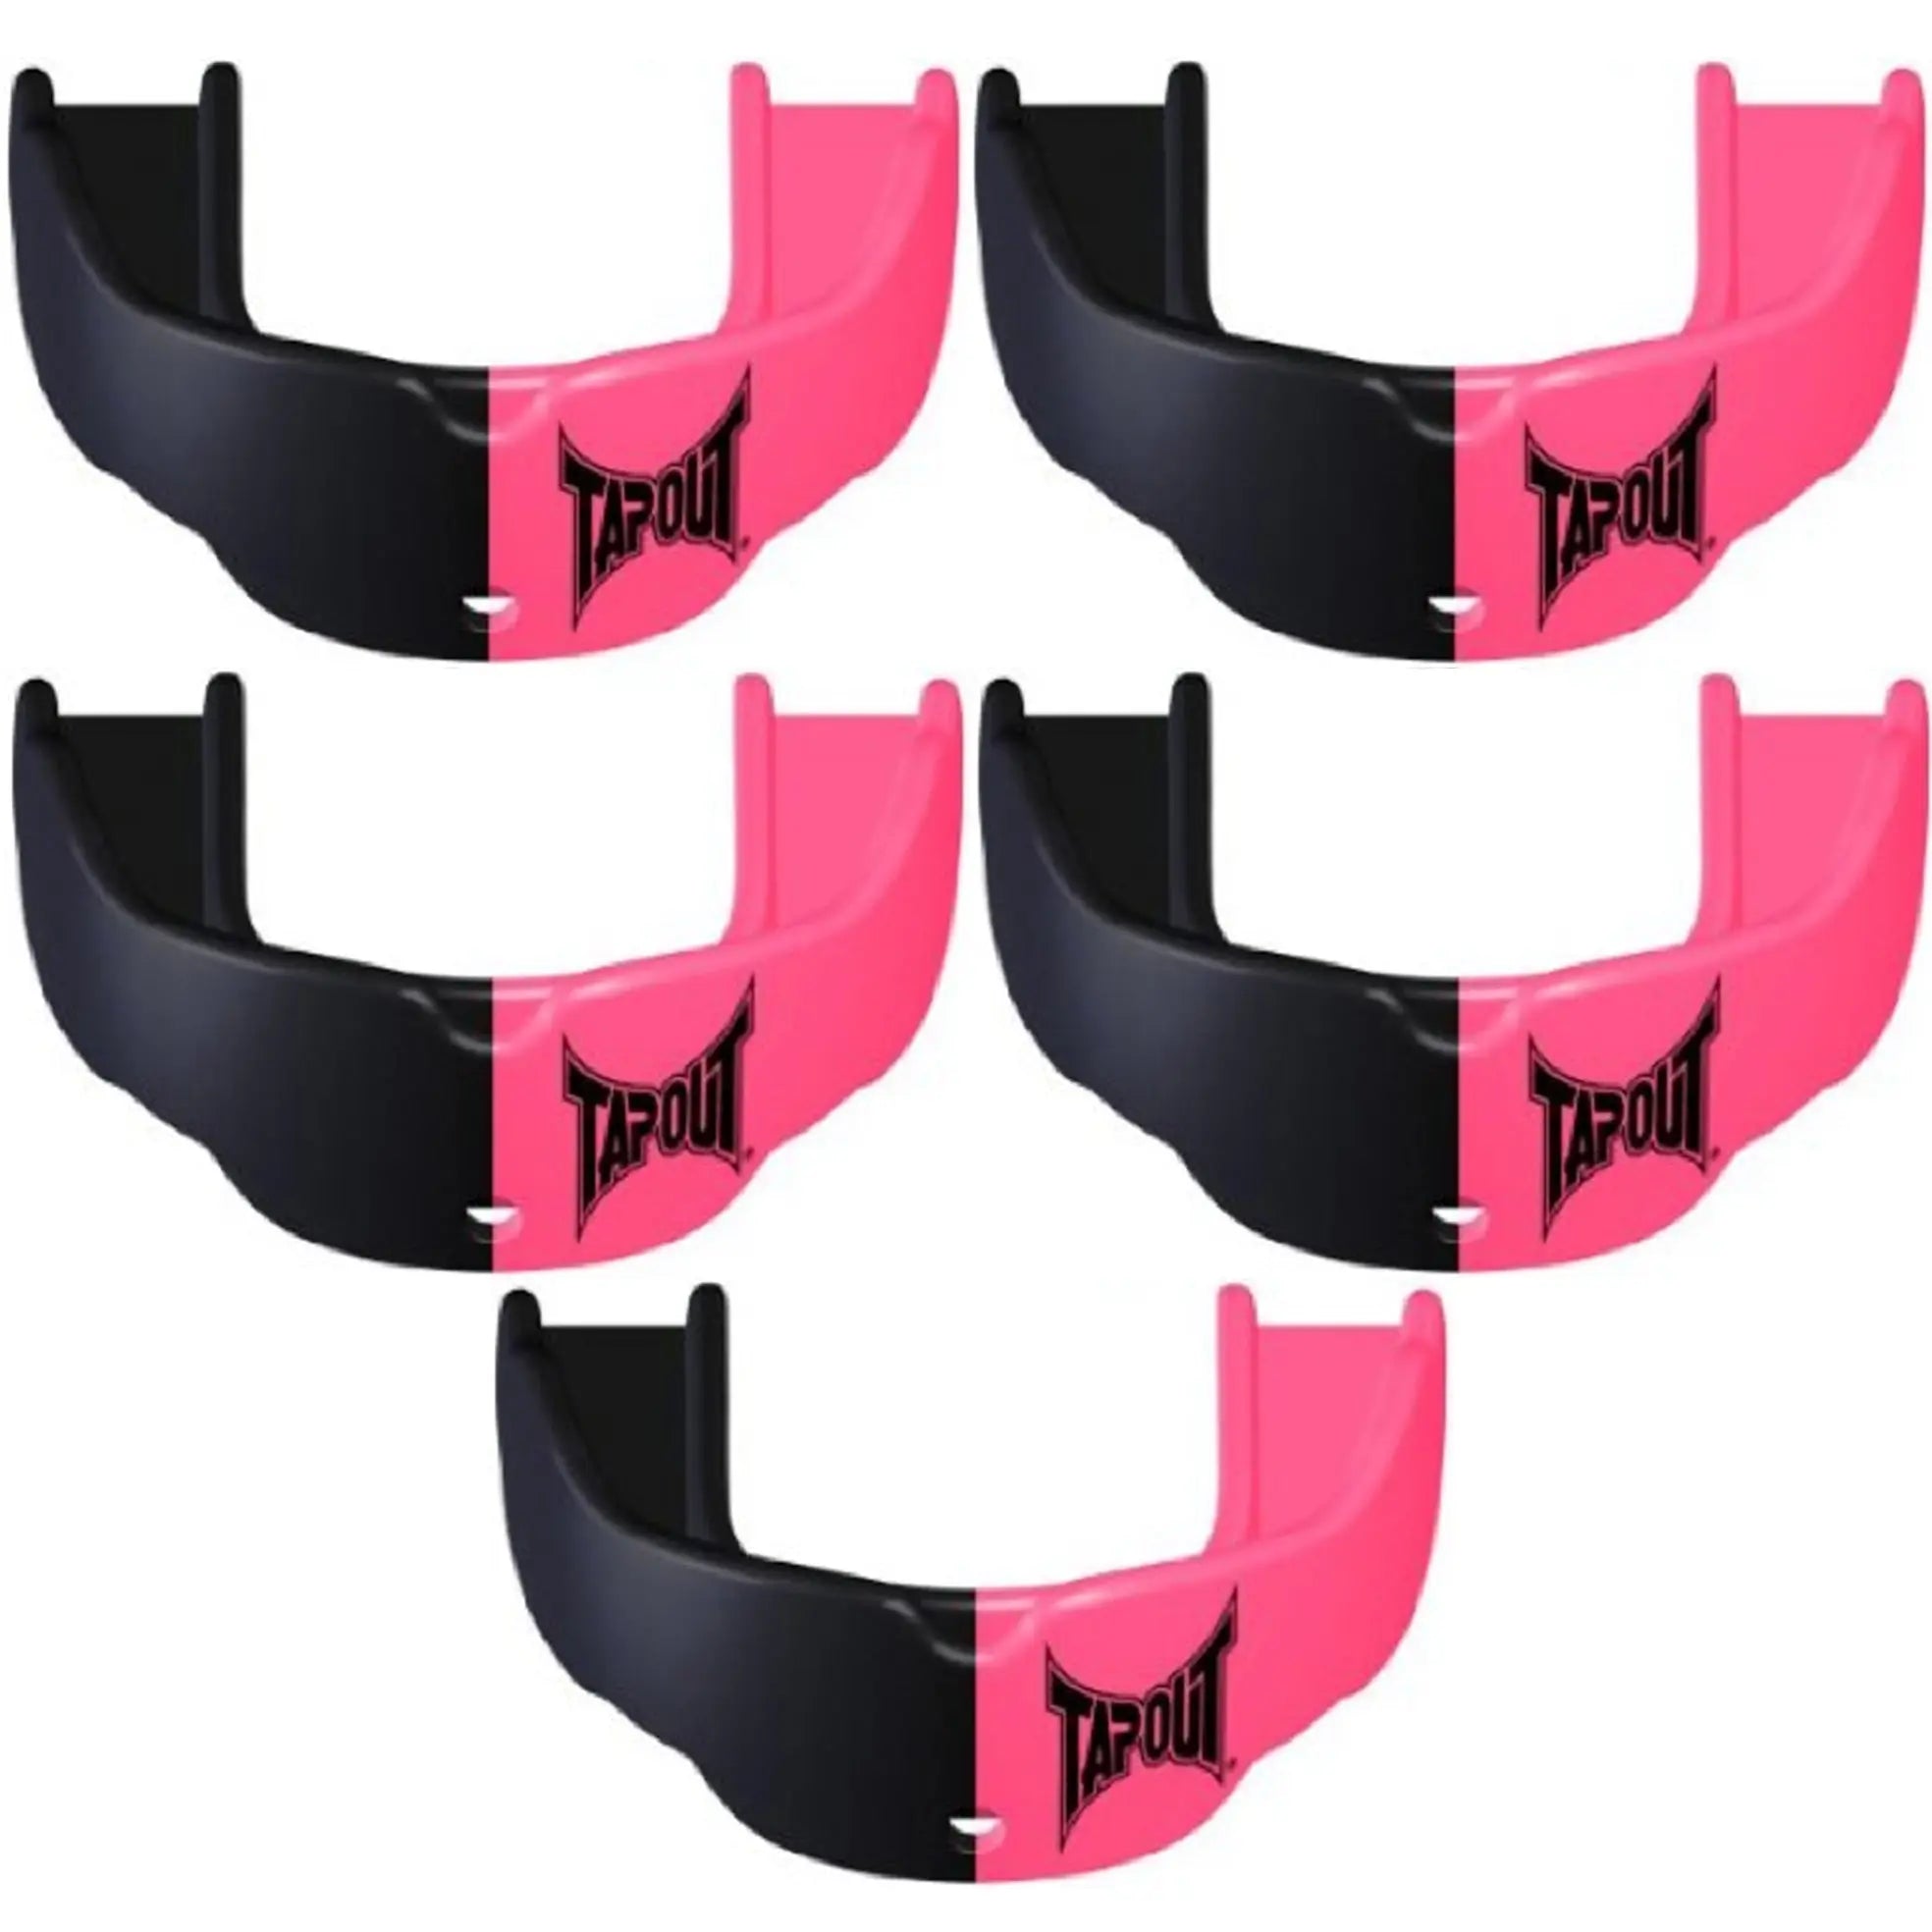 Tapout Youth Protective Sports Mouthguard with Strap 5-Pack - Pink/Black Tapout